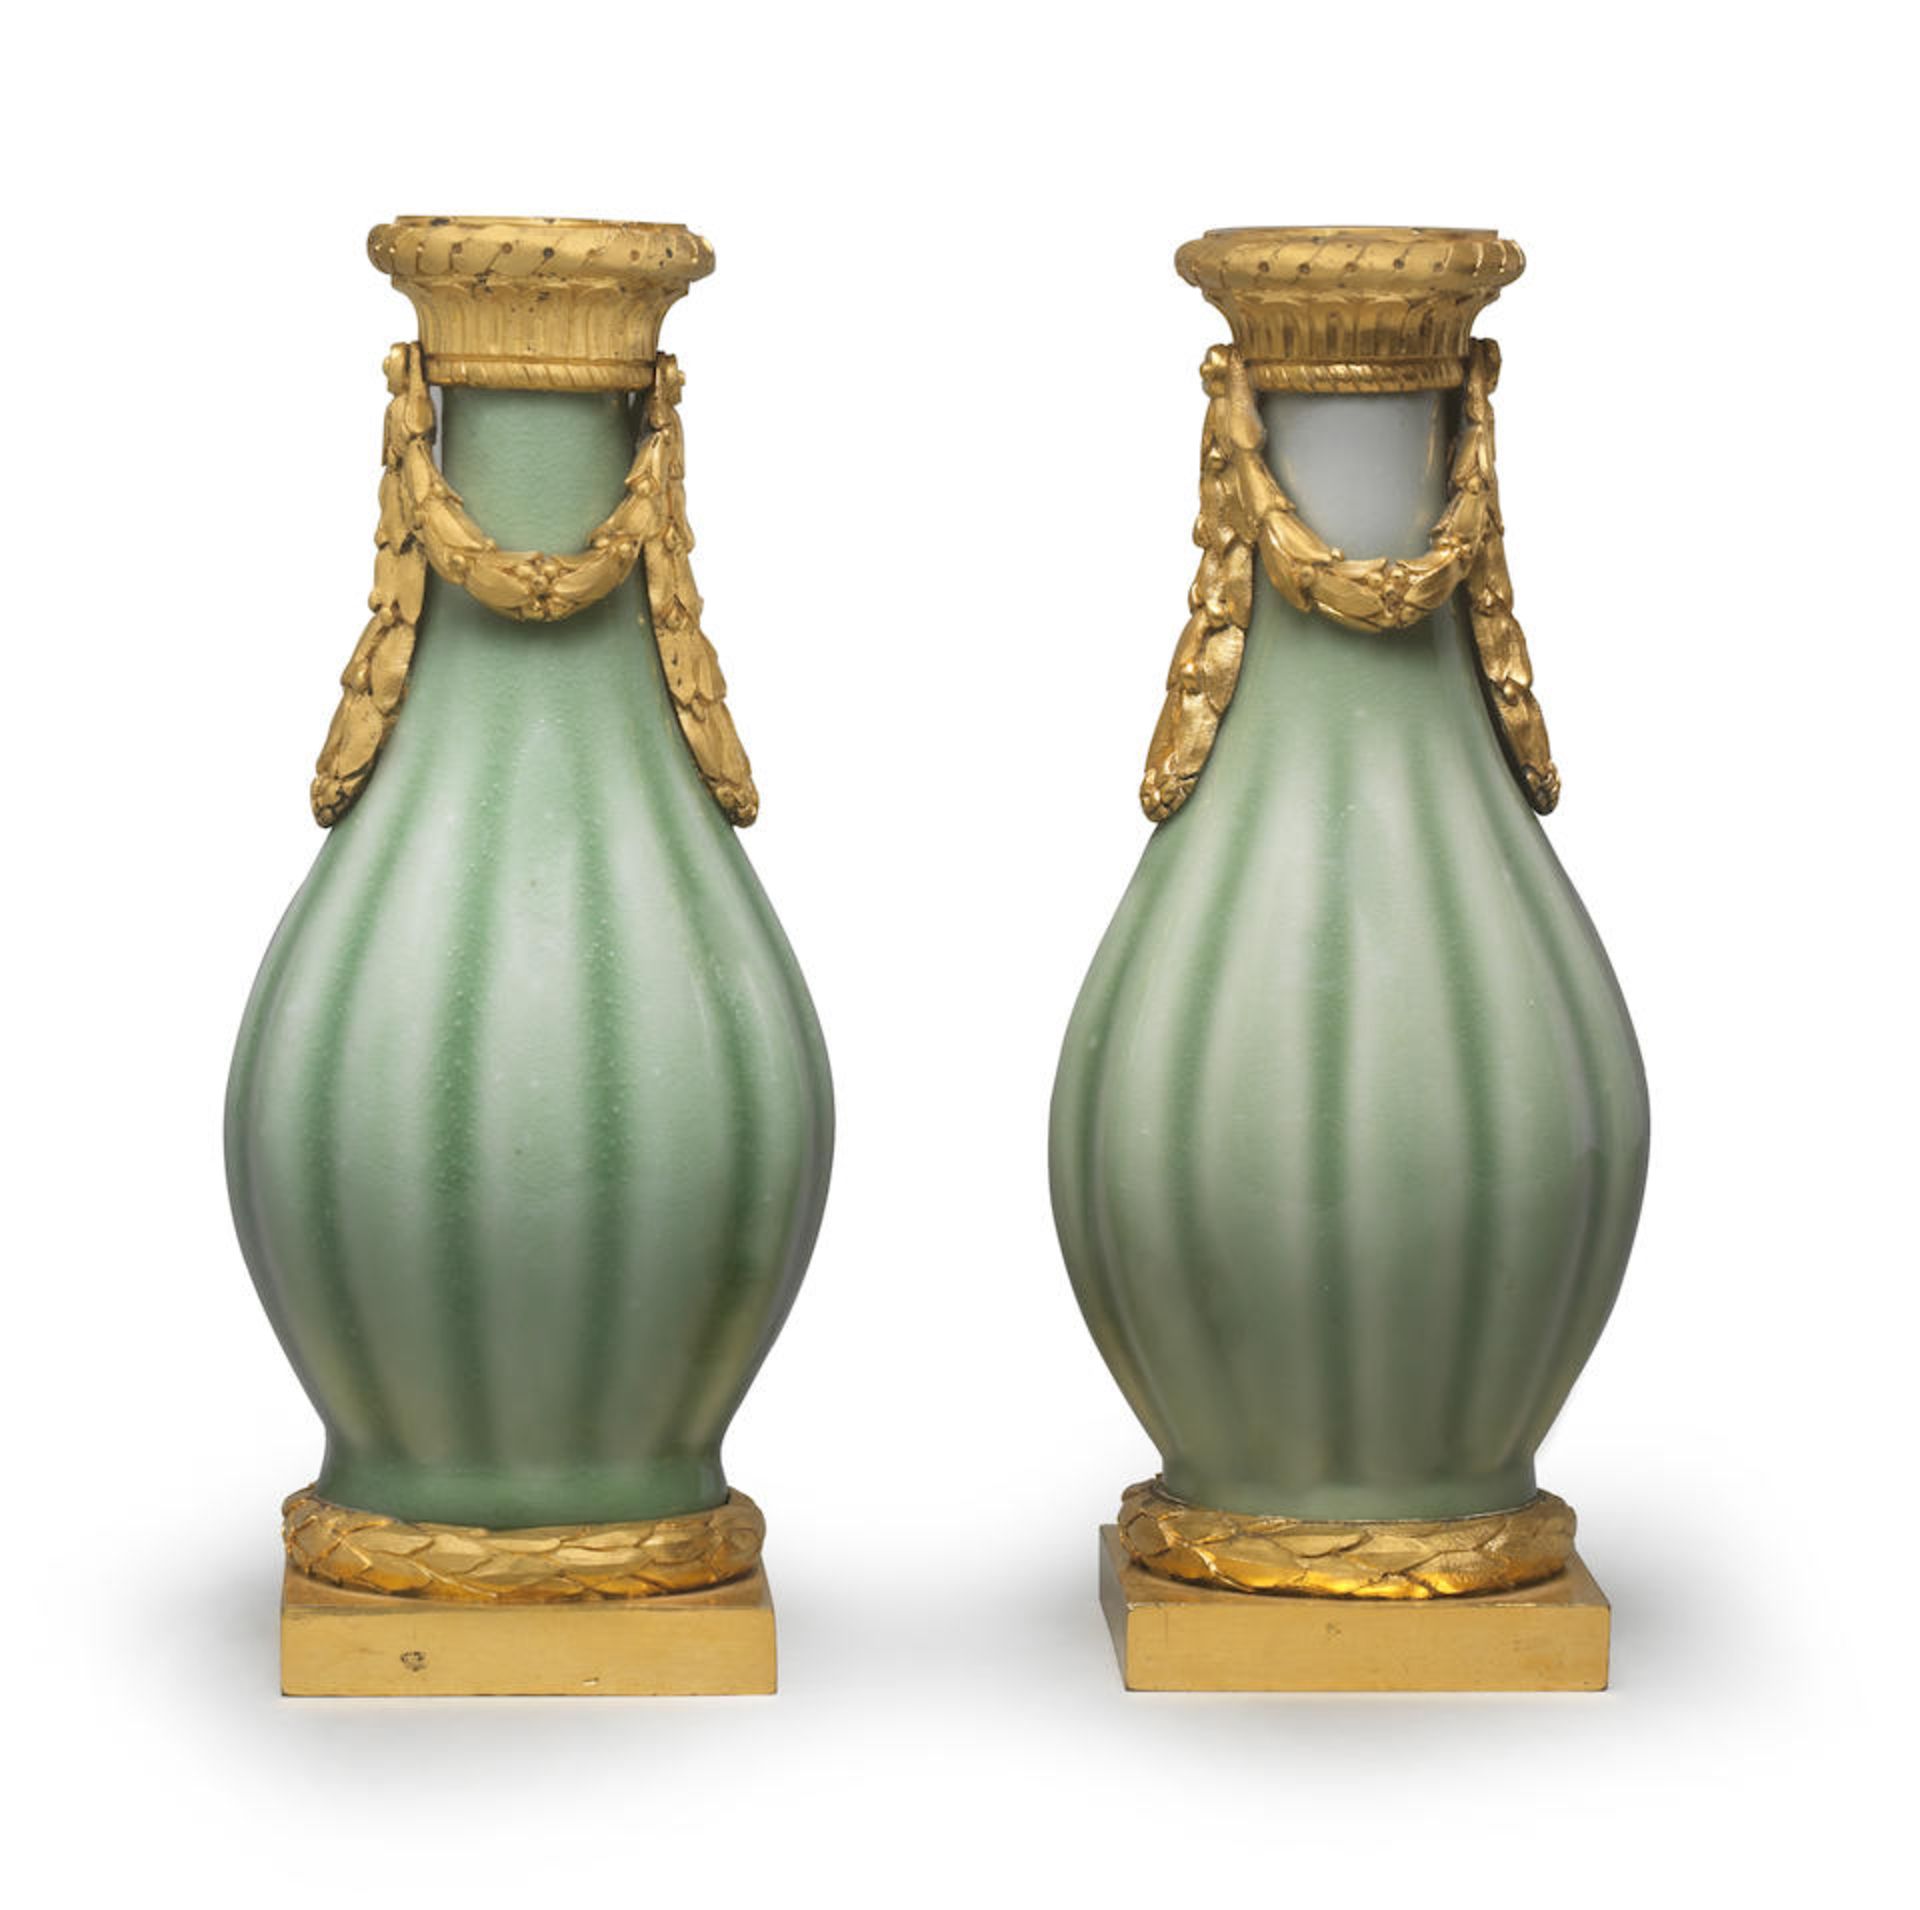 A FINE AND RARE PAIR OF CELADON-GLAZED ORMOLU-MOUNTED VASES The porcelain 18th century, the Fren...